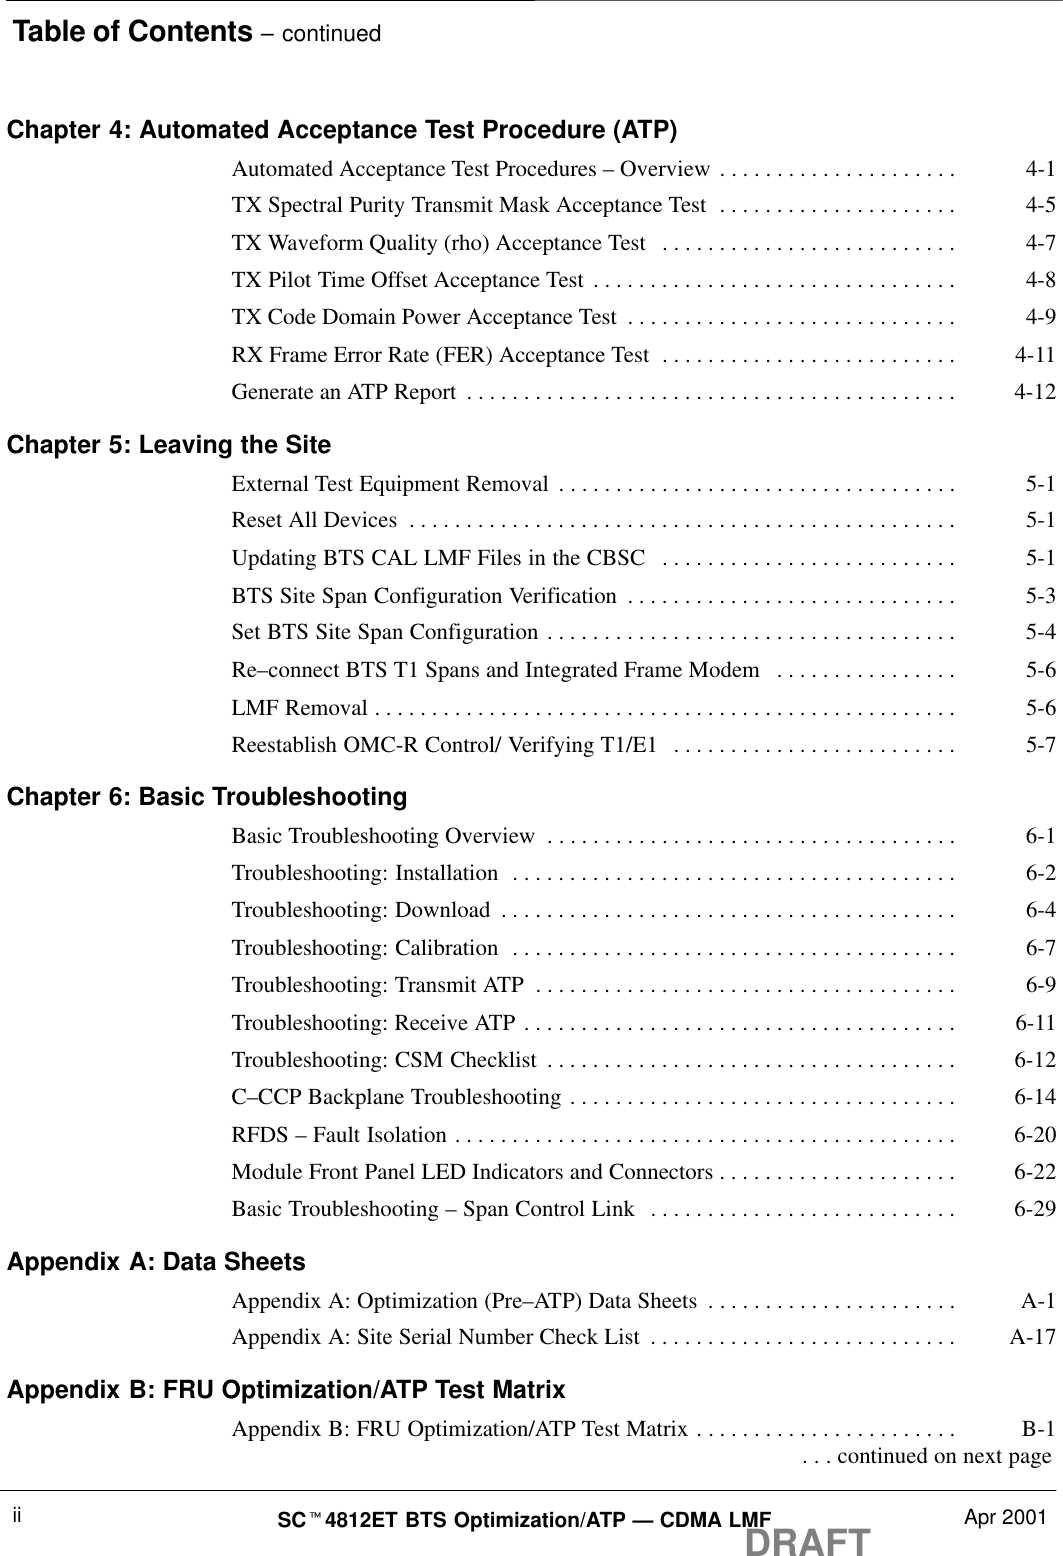 Table of Contents – continuedDRAFTSCt4812ET BTS Optimization/ATP — CDMA LMF Apr 2001iiChapter 4: Automated Acceptance Test Procedure (ATP)Automated Acceptance Test Procedures – Overview 4-1. . . . . . . . . . . . . . . . . . . . . TX Spectral Purity Transmit Mask Acceptance Test 4-5. . . . . . . . . . . . . . . . . . . . . TX Waveform Quality (rho) Acceptance Test 4-7. . . . . . . . . . . . . . . . . . . . . . . . . . TX Pilot Time Offset Acceptance Test 4-8. . . . . . . . . . . . . . . . . . . . . . . . . . . . . . . . TX Code Domain Power Acceptance Test 4-9. . . . . . . . . . . . . . . . . . . . . . . . . . . . . RX Frame Error Rate (FER) Acceptance Test 4-11. . . . . . . . . . . . . . . . . . . . . . . . . . Generate an ATP Report 4-12. . . . . . . . . . . . . . . . . . . . . . . . . . . . . . . . . . . . . . . . . . . Chapter 5: Leaving the SiteExternal Test Equipment Removal 5-1. . . . . . . . . . . . . . . . . . . . . . . . . . . . . . . . . . . Reset All Devices 5-1. . . . . . . . . . . . . . . . . . . . . . . . . . . . . . . . . . . . . . . . . . . . . . . . Updating BTS CAL LMF Files in the CBSC 5-1. . . . . . . . . . . . . . . . . . . . . . . . . . BTS Site Span Configuration Verification 5-3. . . . . . . . . . . . . . . . . . . . . . . . . . . . . Set BTS Site Span Configuration 5-4. . . . . . . . . . . . . . . . . . . . . . . . . . . . . . . . . . . . Re–connect BTS T1 Spans and Integrated Frame Modem 5-6. . . . . . . . . . . . . . . . LMF Removal 5-6. . . . . . . . . . . . . . . . . . . . . . . . . . . . . . . . . . . . . . . . . . . . . . . . . . . Reestablish OMC-R Control/ Verifying T1/E1 5-7. . . . . . . . . . . . . . . . . . . . . . . . . Chapter 6: Basic TroubleshootingBasic Troubleshooting Overview 6-1. . . . . . . . . . . . . . . . . . . . . . . . . . . . . . . . . . . . Troubleshooting: Installation 6-2. . . . . . . . . . . . . . . . . . . . . . . . . . . . . . . . . . . . . . . Troubleshooting: Download 6-4. . . . . . . . . . . . . . . . . . . . . . . . . . . . . . . . . . . . . . . . Troubleshooting: Calibration 6-7. . . . . . . . . . . . . . . . . . . . . . . . . . . . . . . . . . . . . . . Troubleshooting: Transmit ATP 6-9. . . . . . . . . . . . . . . . . . . . . . . . . . . . . . . . . . . . . Troubleshooting: Receive ATP 6-11. . . . . . . . . . . . . . . . . . . . . . . . . . . . . . . . . . . . . . Troubleshooting: CSM Checklist 6-12. . . . . . . . . . . . . . . . . . . . . . . . . . . . . . . . . . . . C–CCP Backplane Troubleshooting 6-14. . . . . . . . . . . . . . . . . . . . . . . . . . . . . . . . . . RFDS – Fault Isolation 6-20. . . . . . . . . . . . . . . . . . . . . . . . . . . . . . . . . . . . . . . . . . . . Module Front Panel LED Indicators and Connectors 6-22. . . . . . . . . . . . . . . . . . . . . Basic Troubleshooting – Span Control Link 6-29. . . . . . . . . . . . . . . . . . . . . . . . . . . Appendix A: Data SheetsAppendix A: Optimization (Pre–ATP) Data Sheets A-1. . . . . . . . . . . . . . . . . . . . . . Appendix A: Site Serial Number Check List A-17. . . . . . . . . . . . . . . . . . . . . . . . . . . Appendix B: FRU Optimization/ATP Test MatrixAppendix B: FRU Optimization/ATP Test Matrix B-1. . . . . . . . . . . . . . . . . . . . . . .  . . . continued on next page